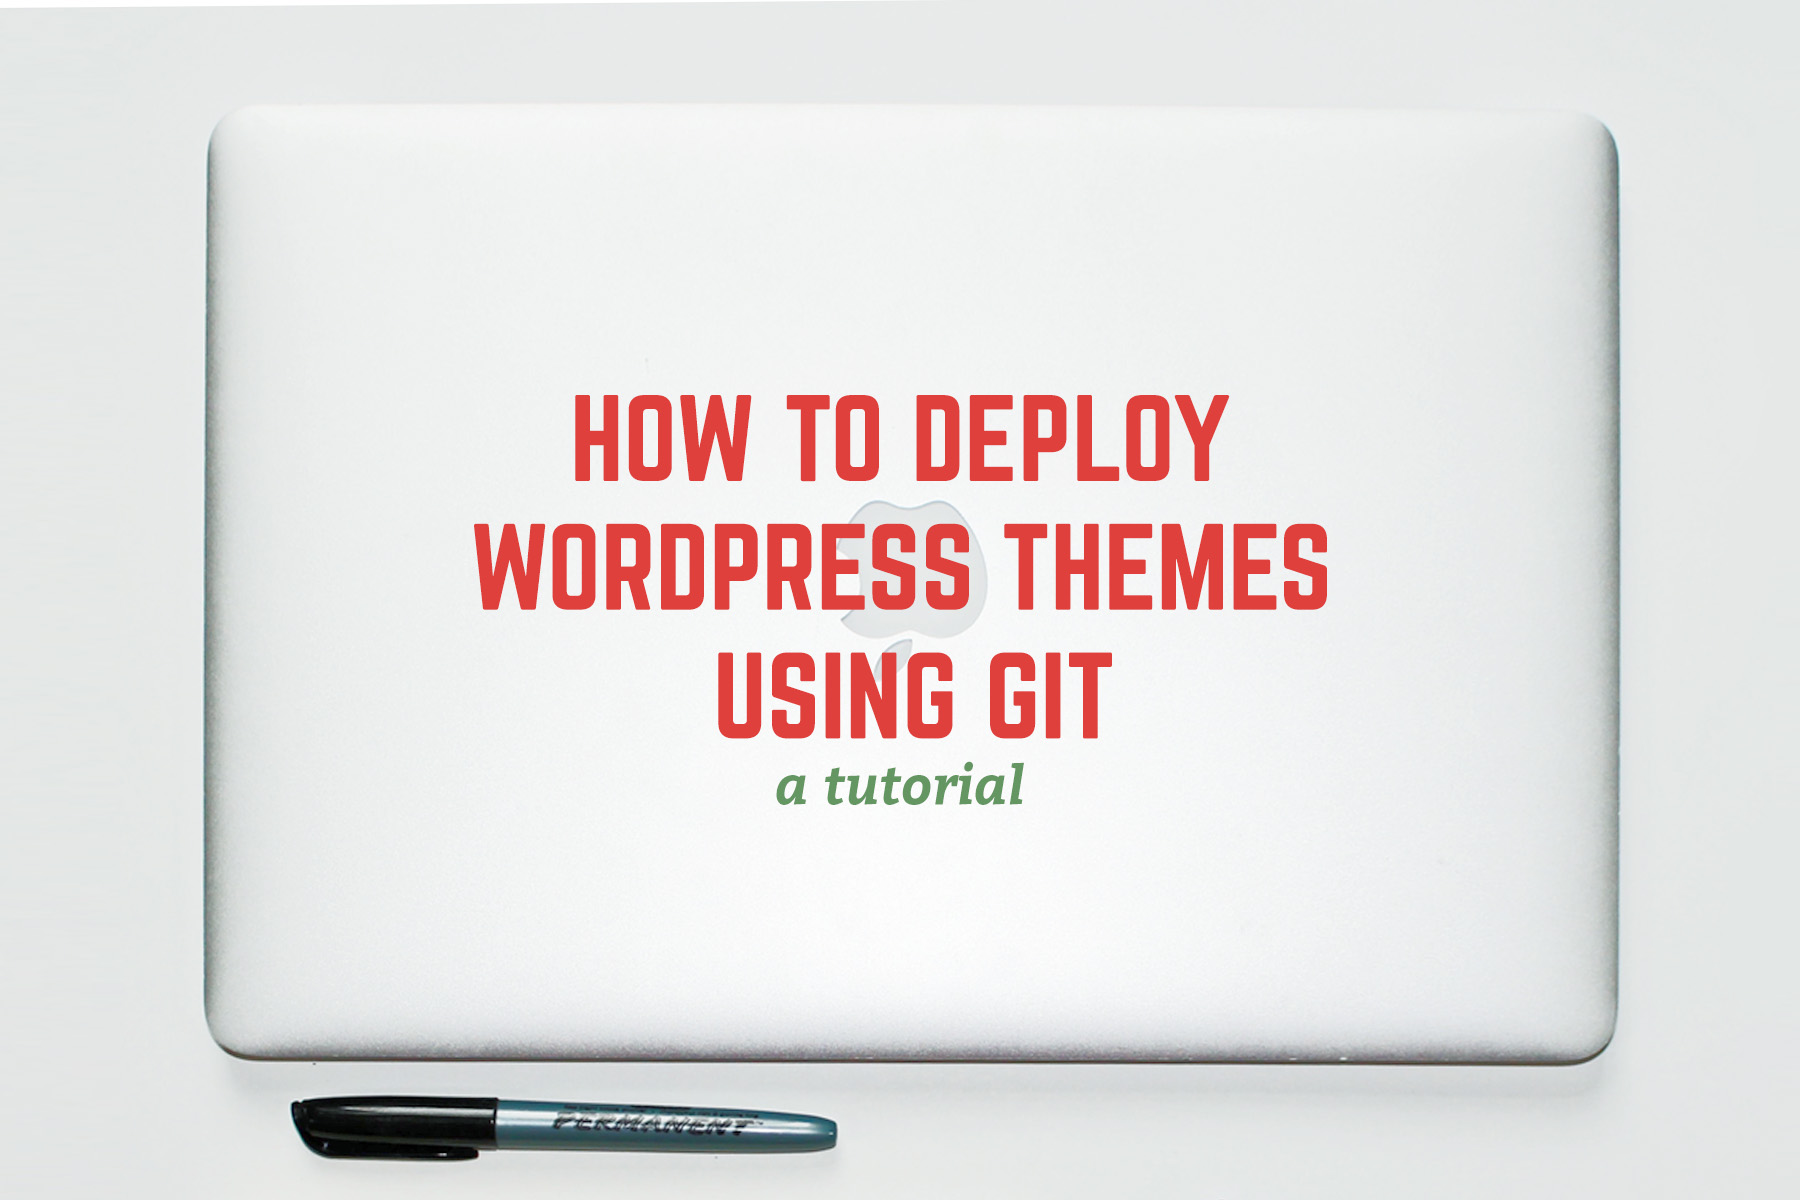 How to Deploy WordPress themes using Git